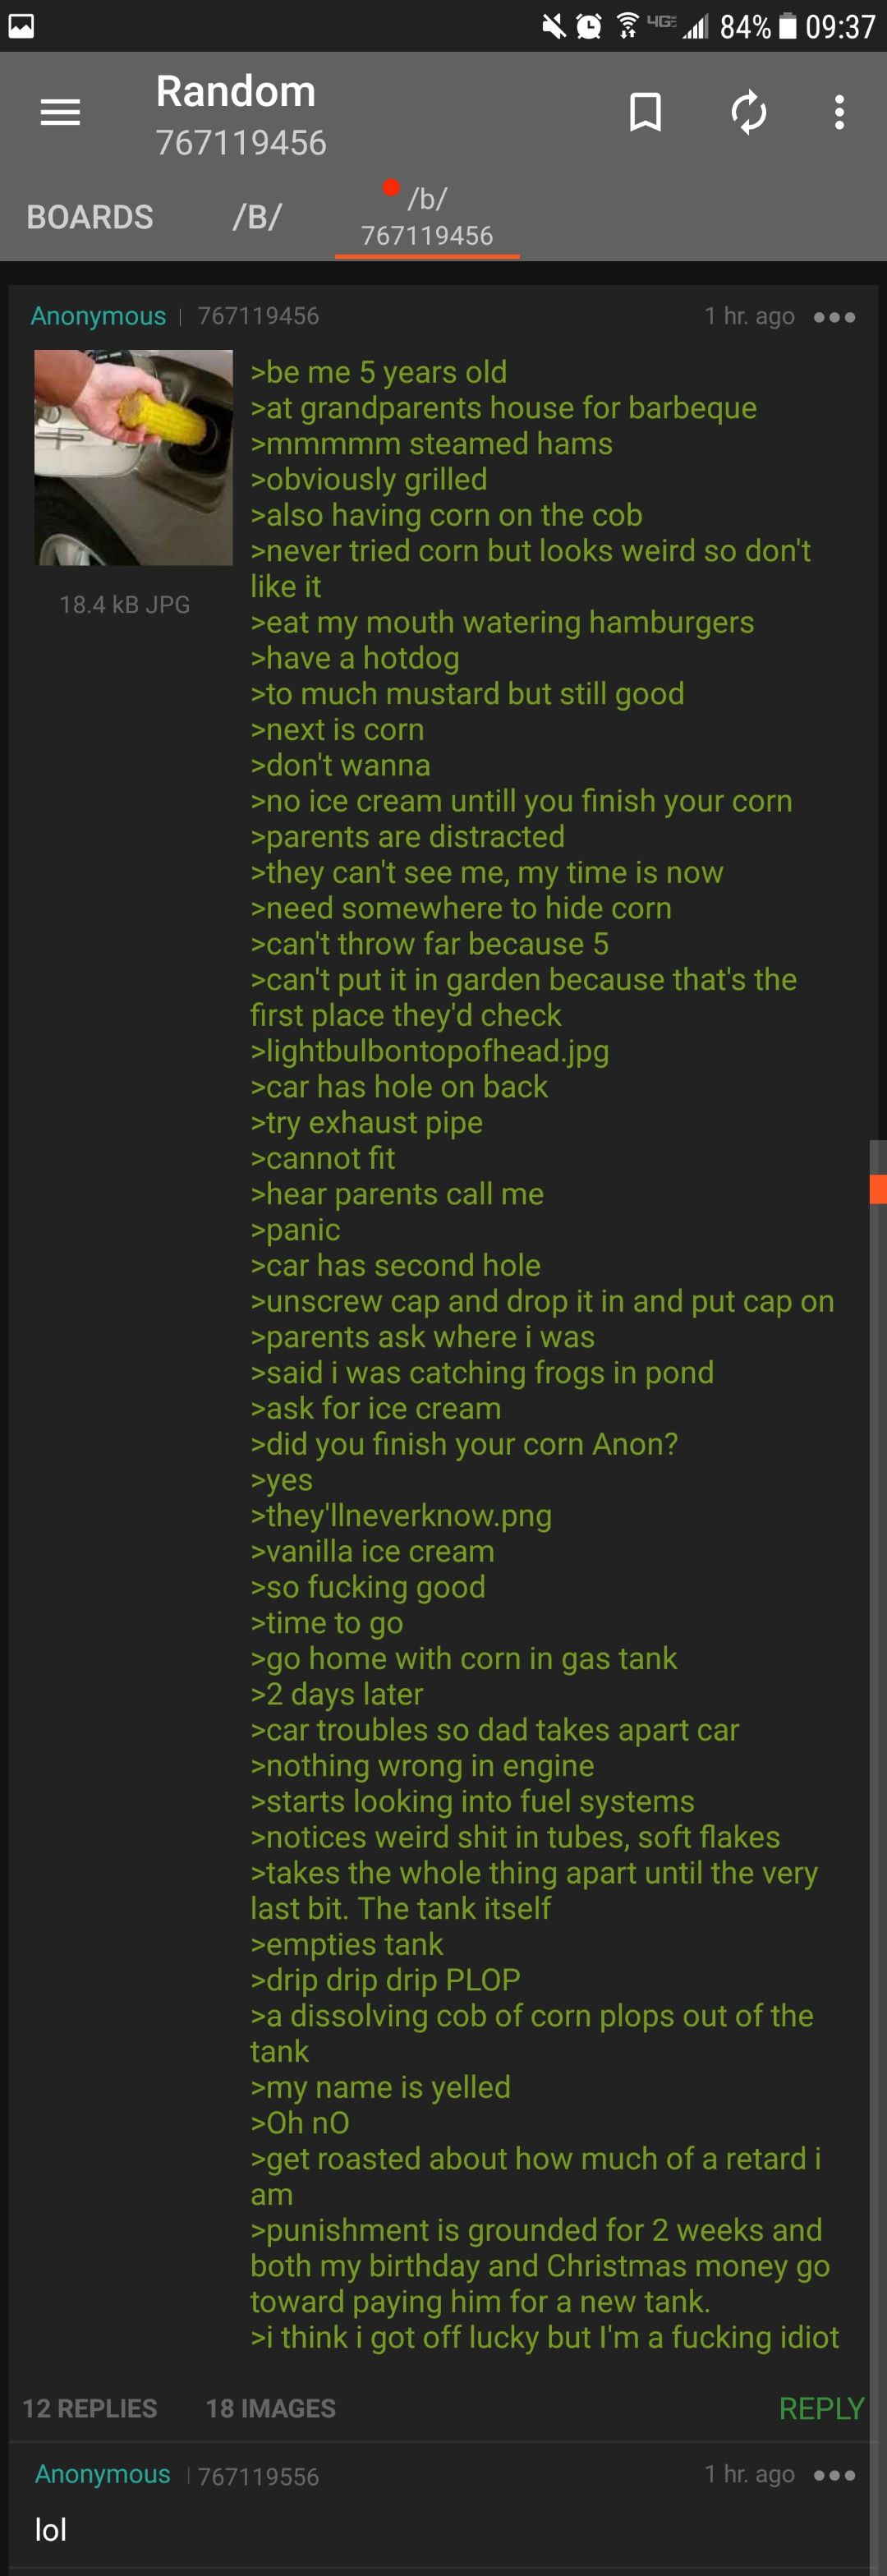 Anon puts corn in a hole